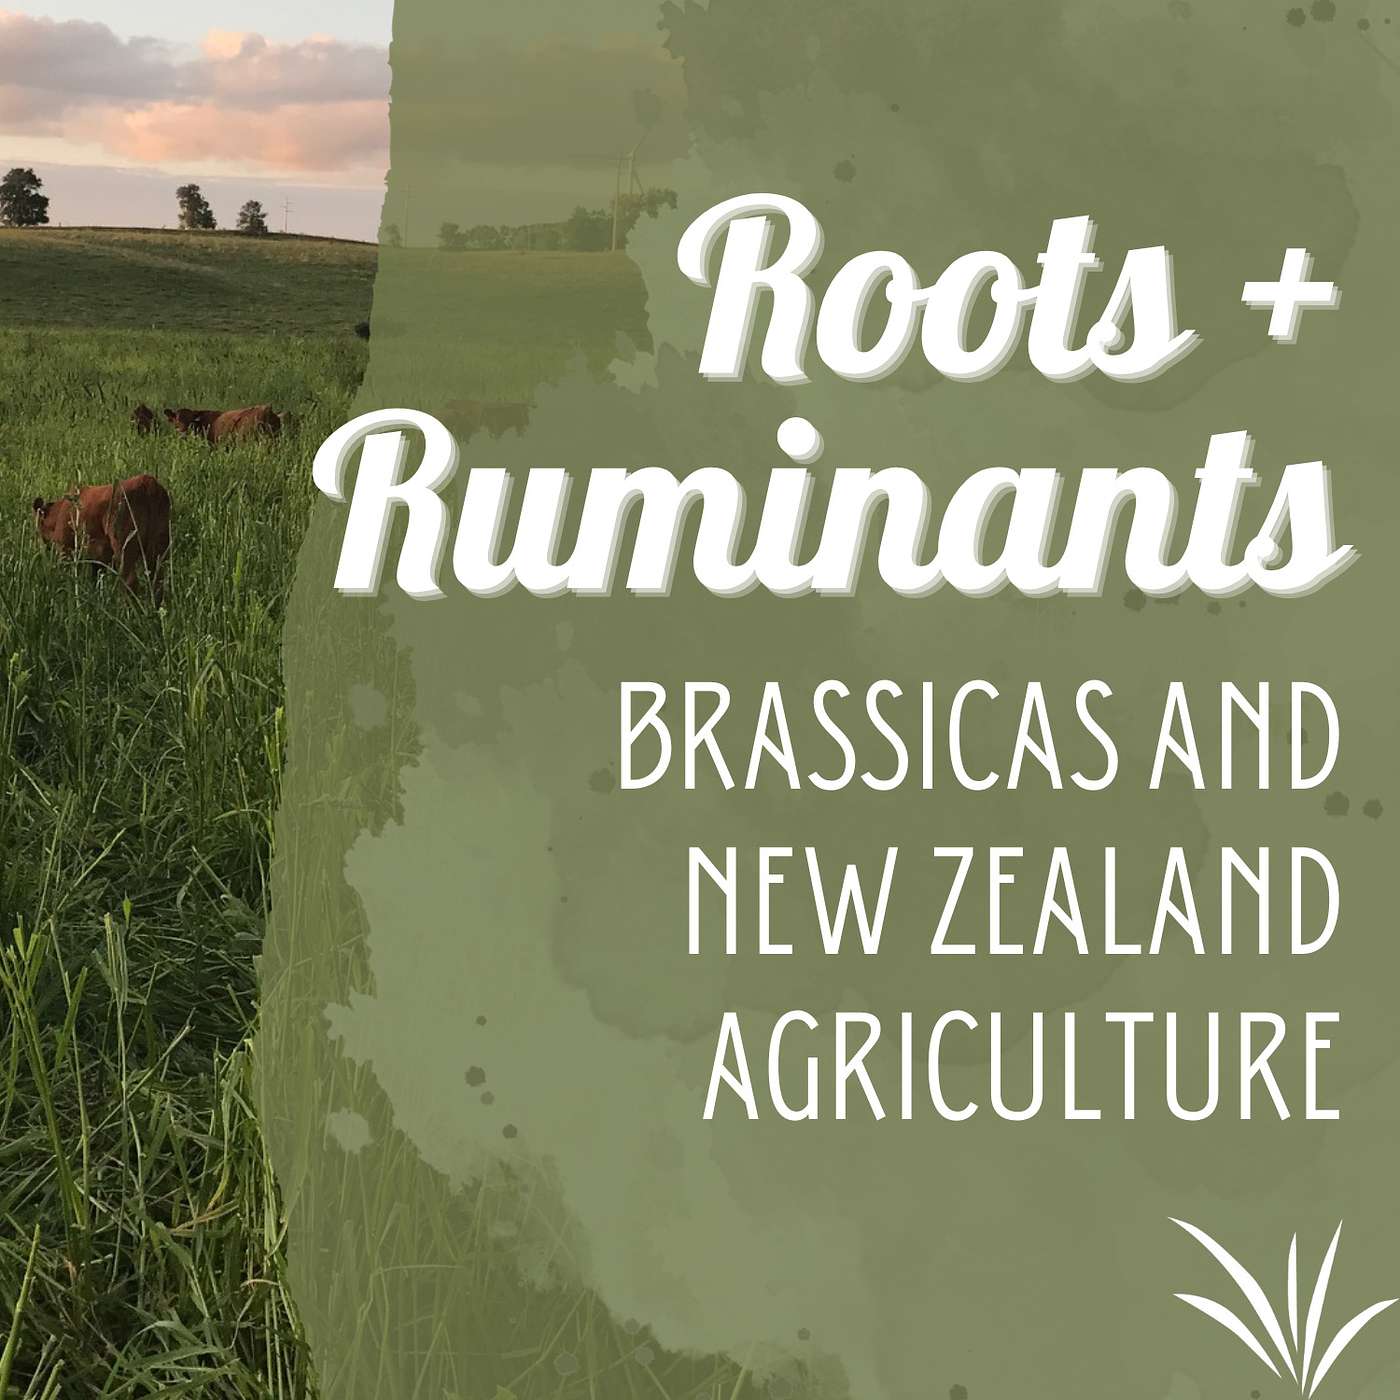 Steven Bennett on brassica breeding, New Zealand agriculture, and a brassica-only graze it, harvest it, rent it cover art